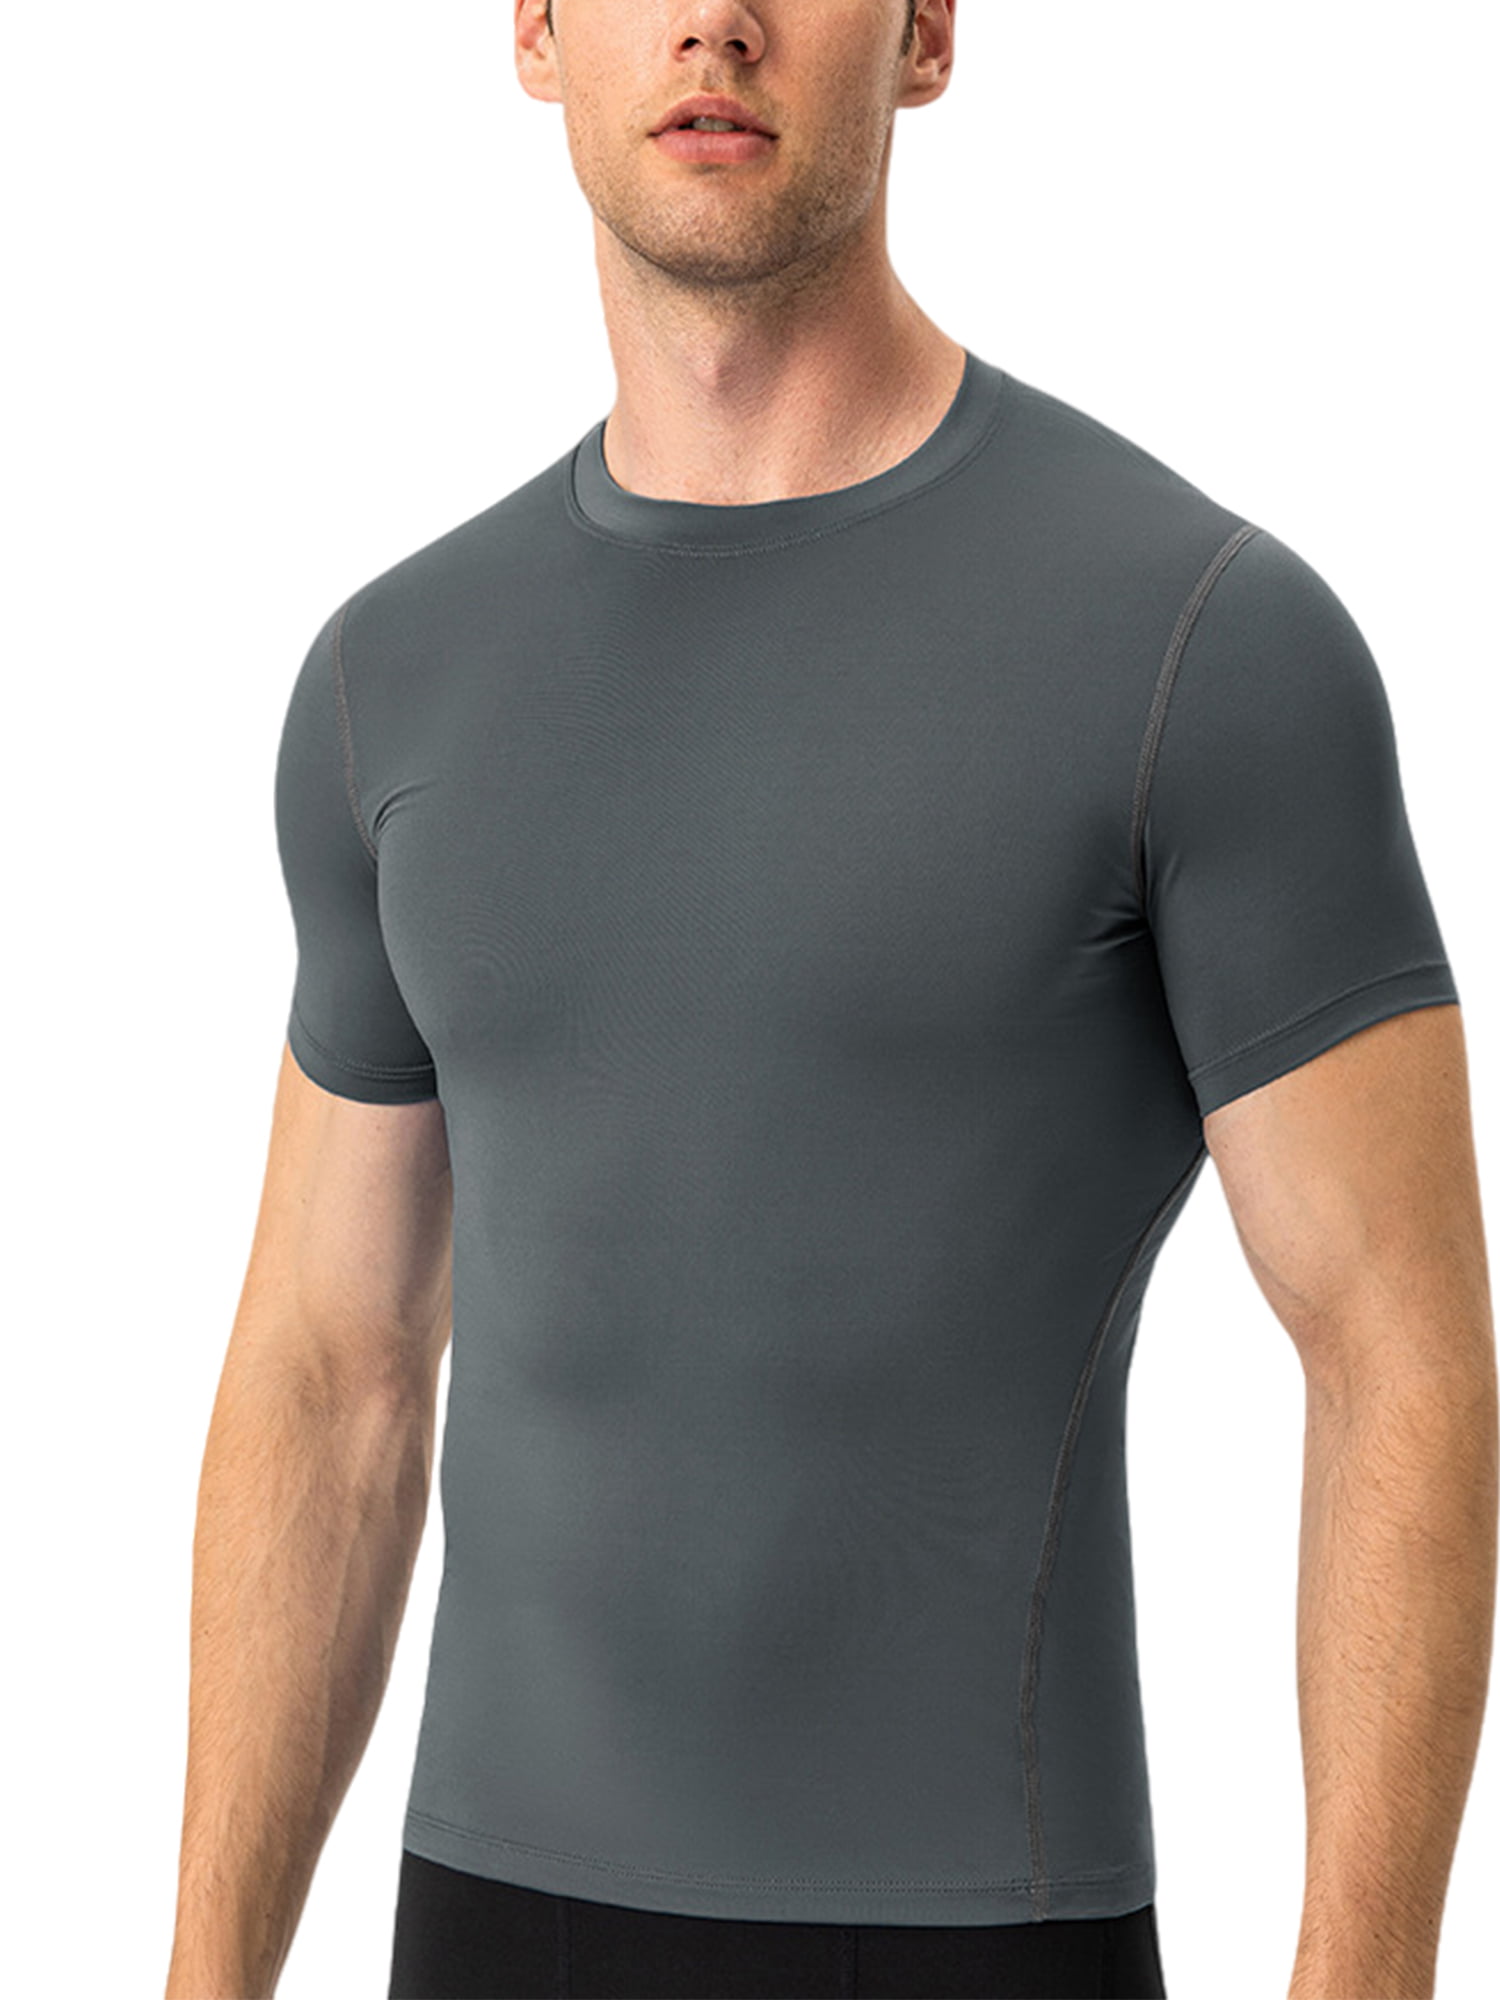 Glonme Men Compression Shirts Baselayer Summer Tops Cool Dry